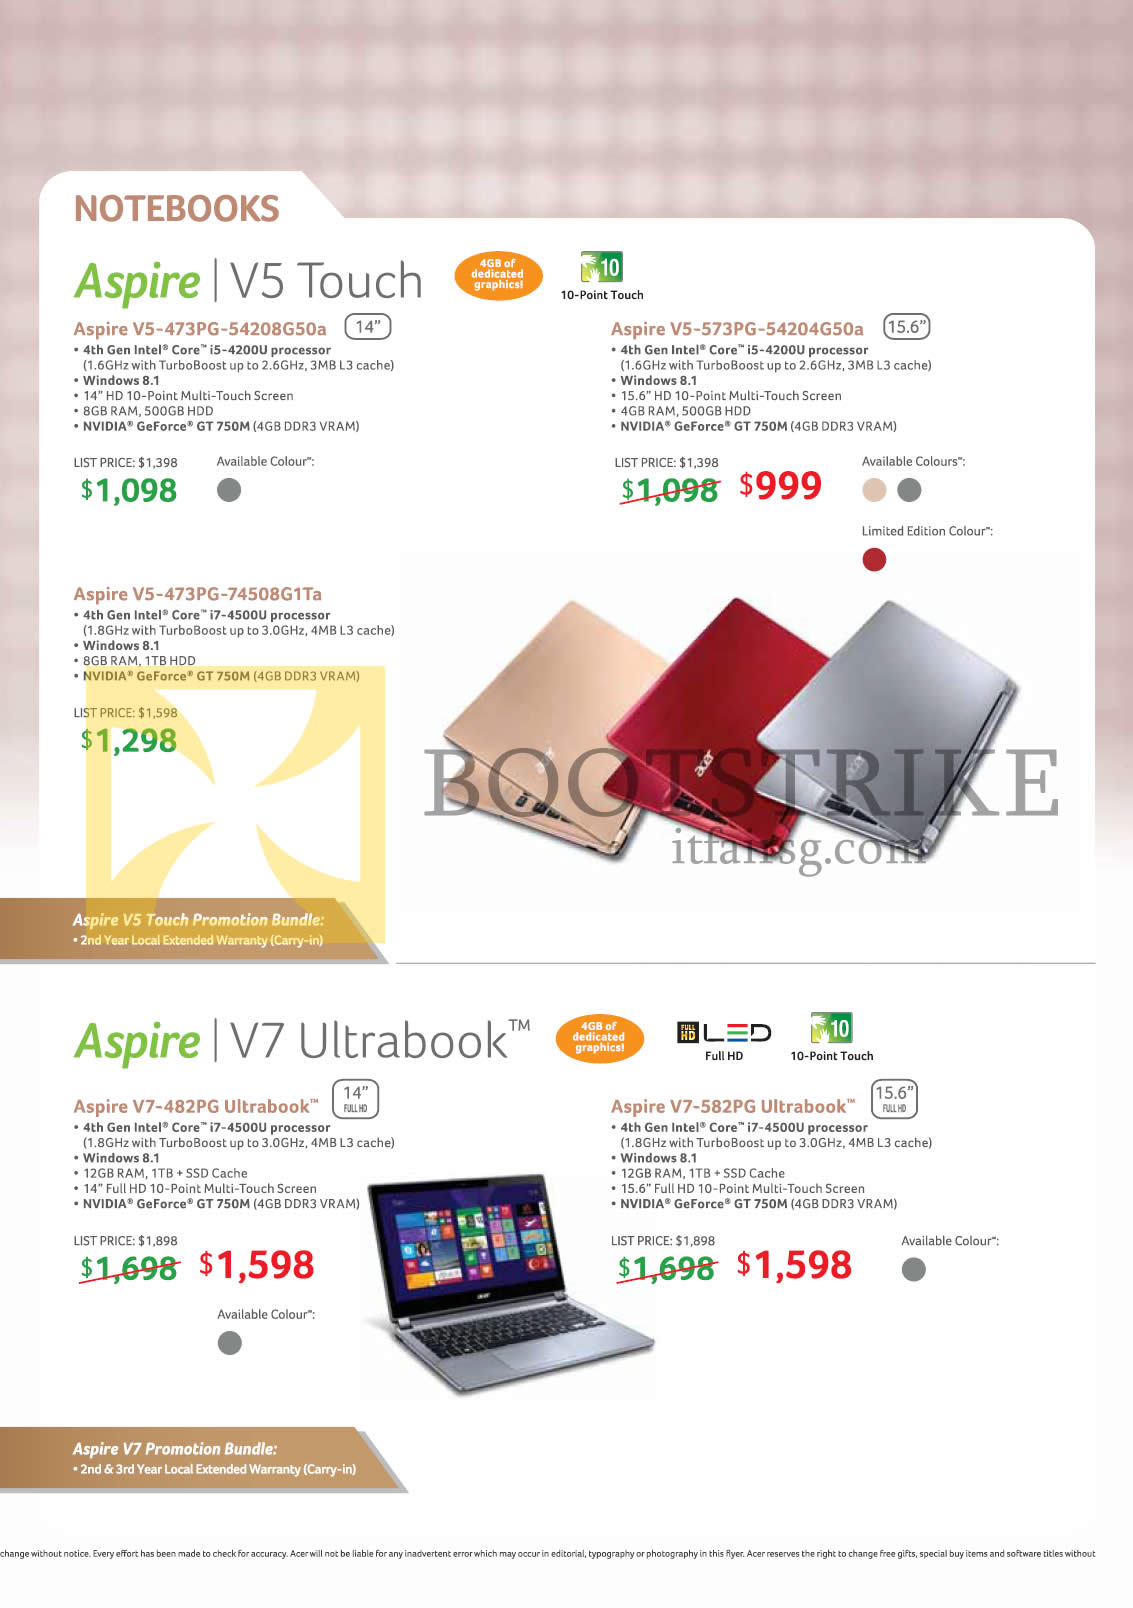 PC SHOW 2014 price list image brochure of Acer Notebooks Aspire V5-473PG-54208G50a, 573PG-54204G50a, 473PG-74508G1Ta, V7-482PG, 582PG